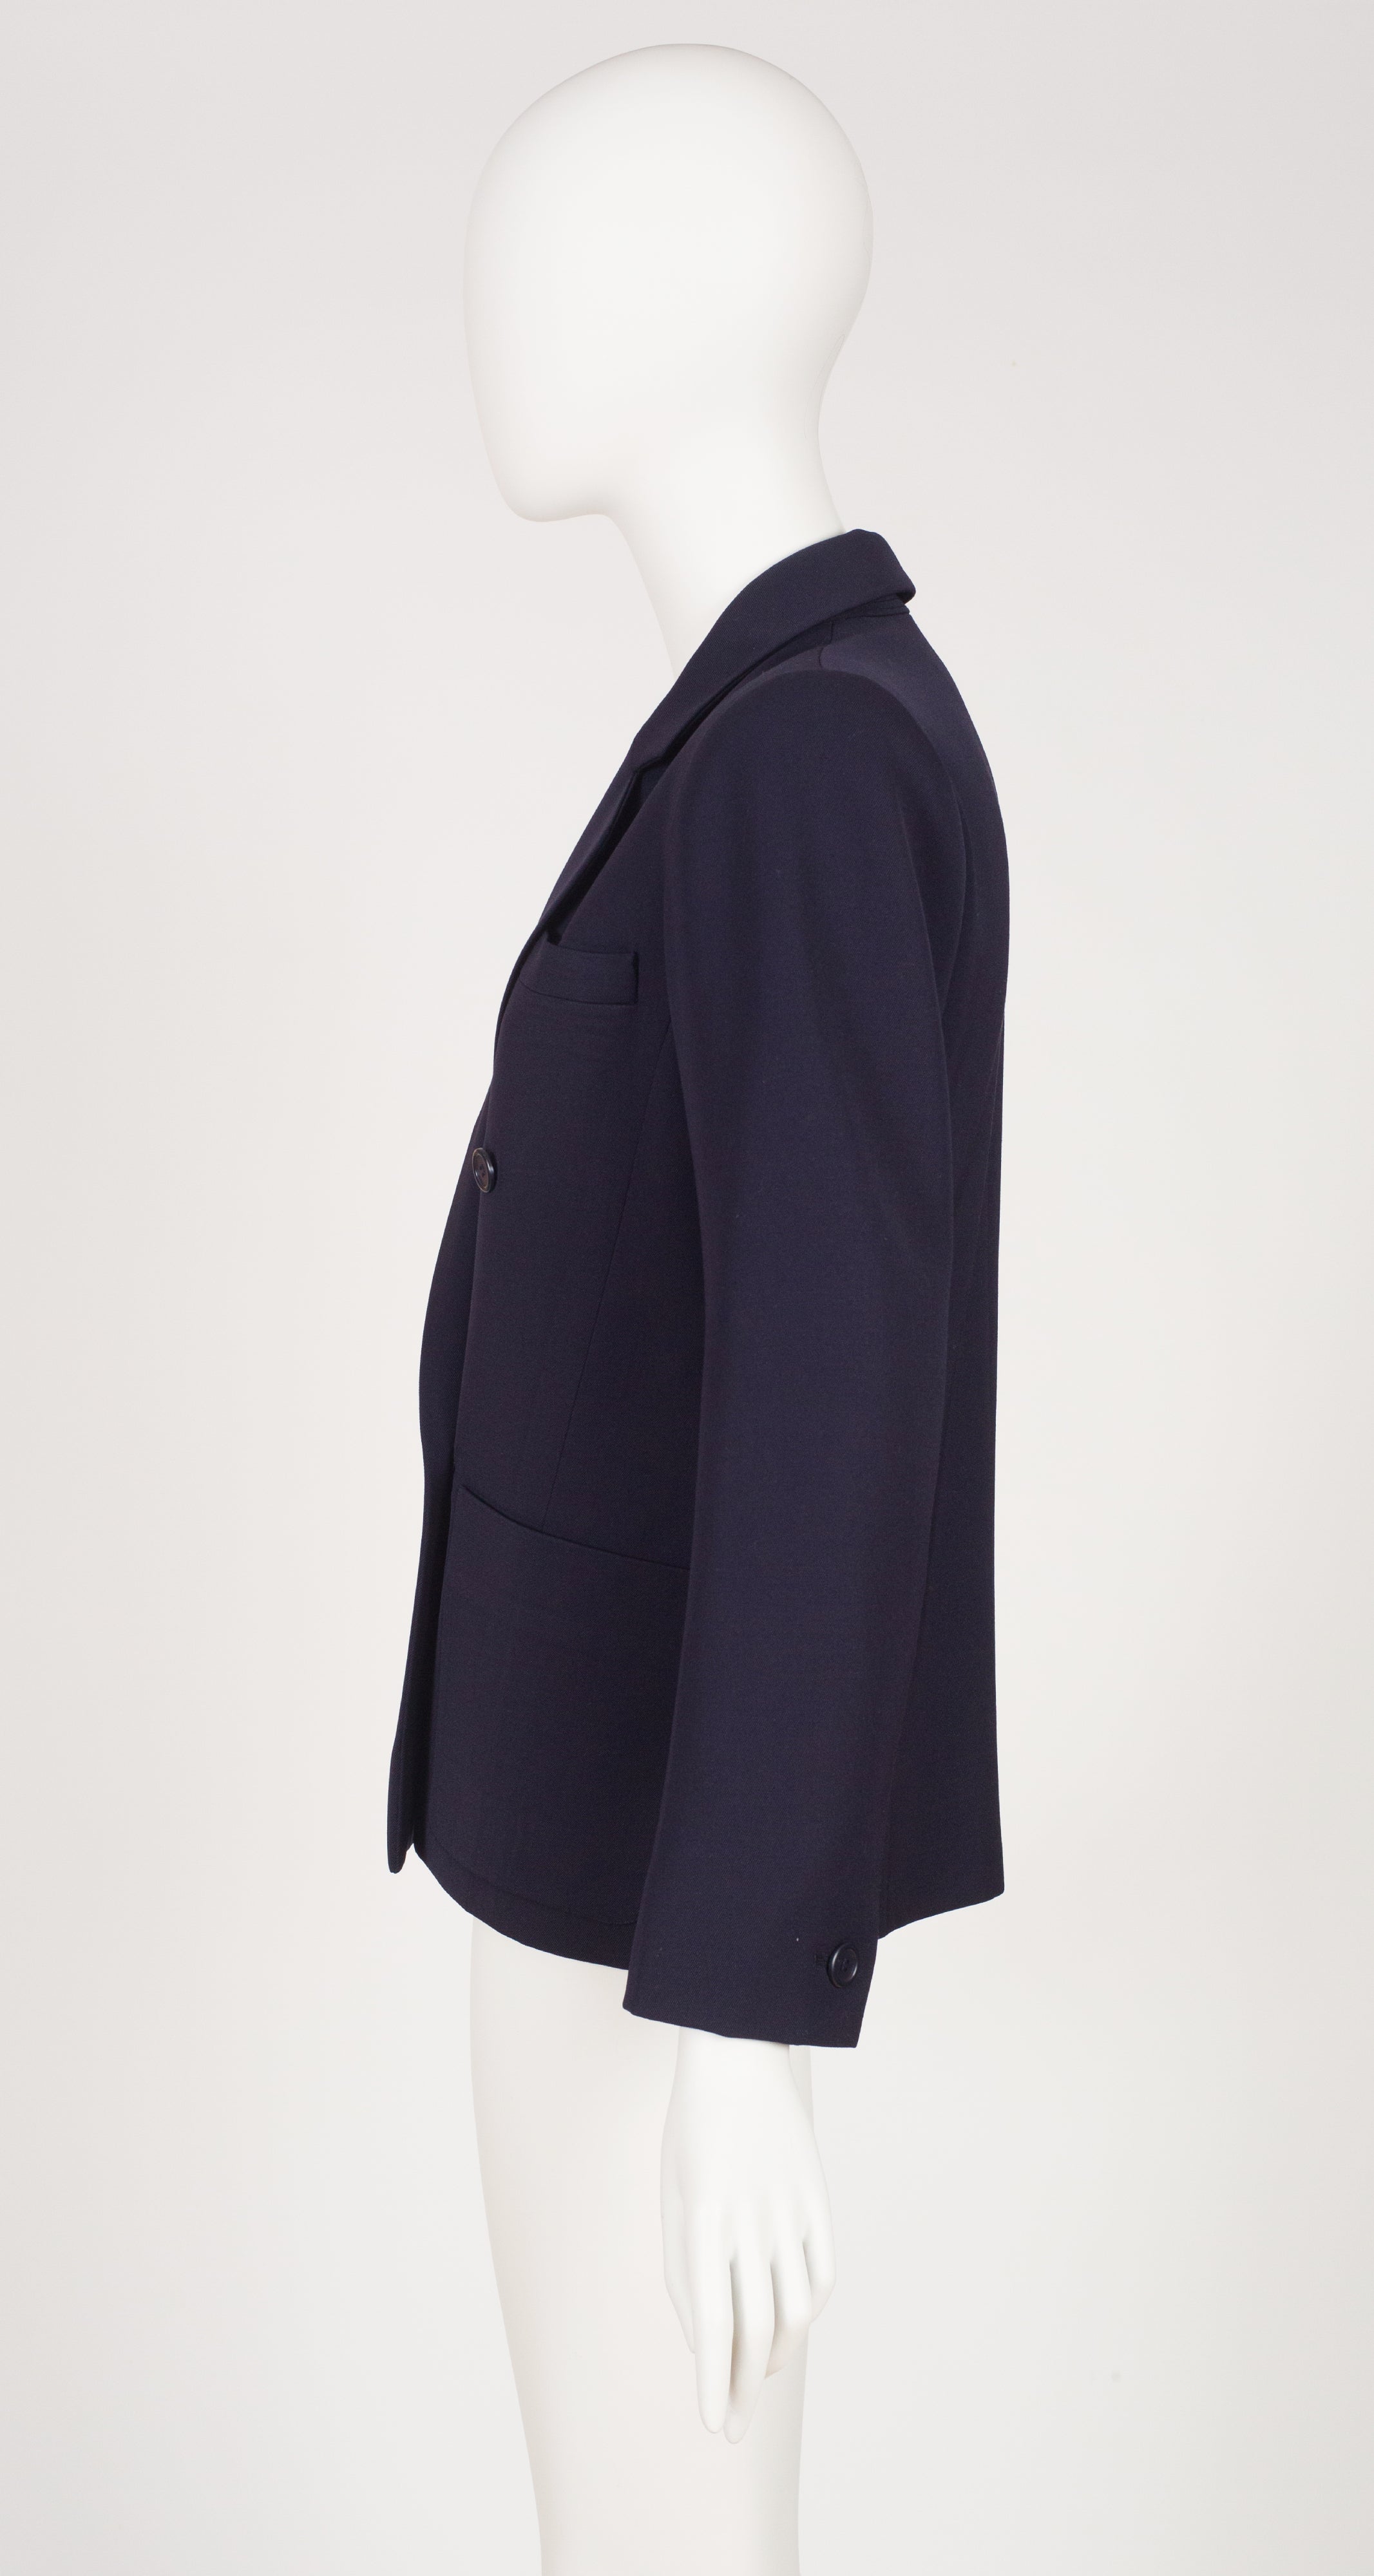 1981 S/S Navy Blue Wool Double-Breasted Blazer